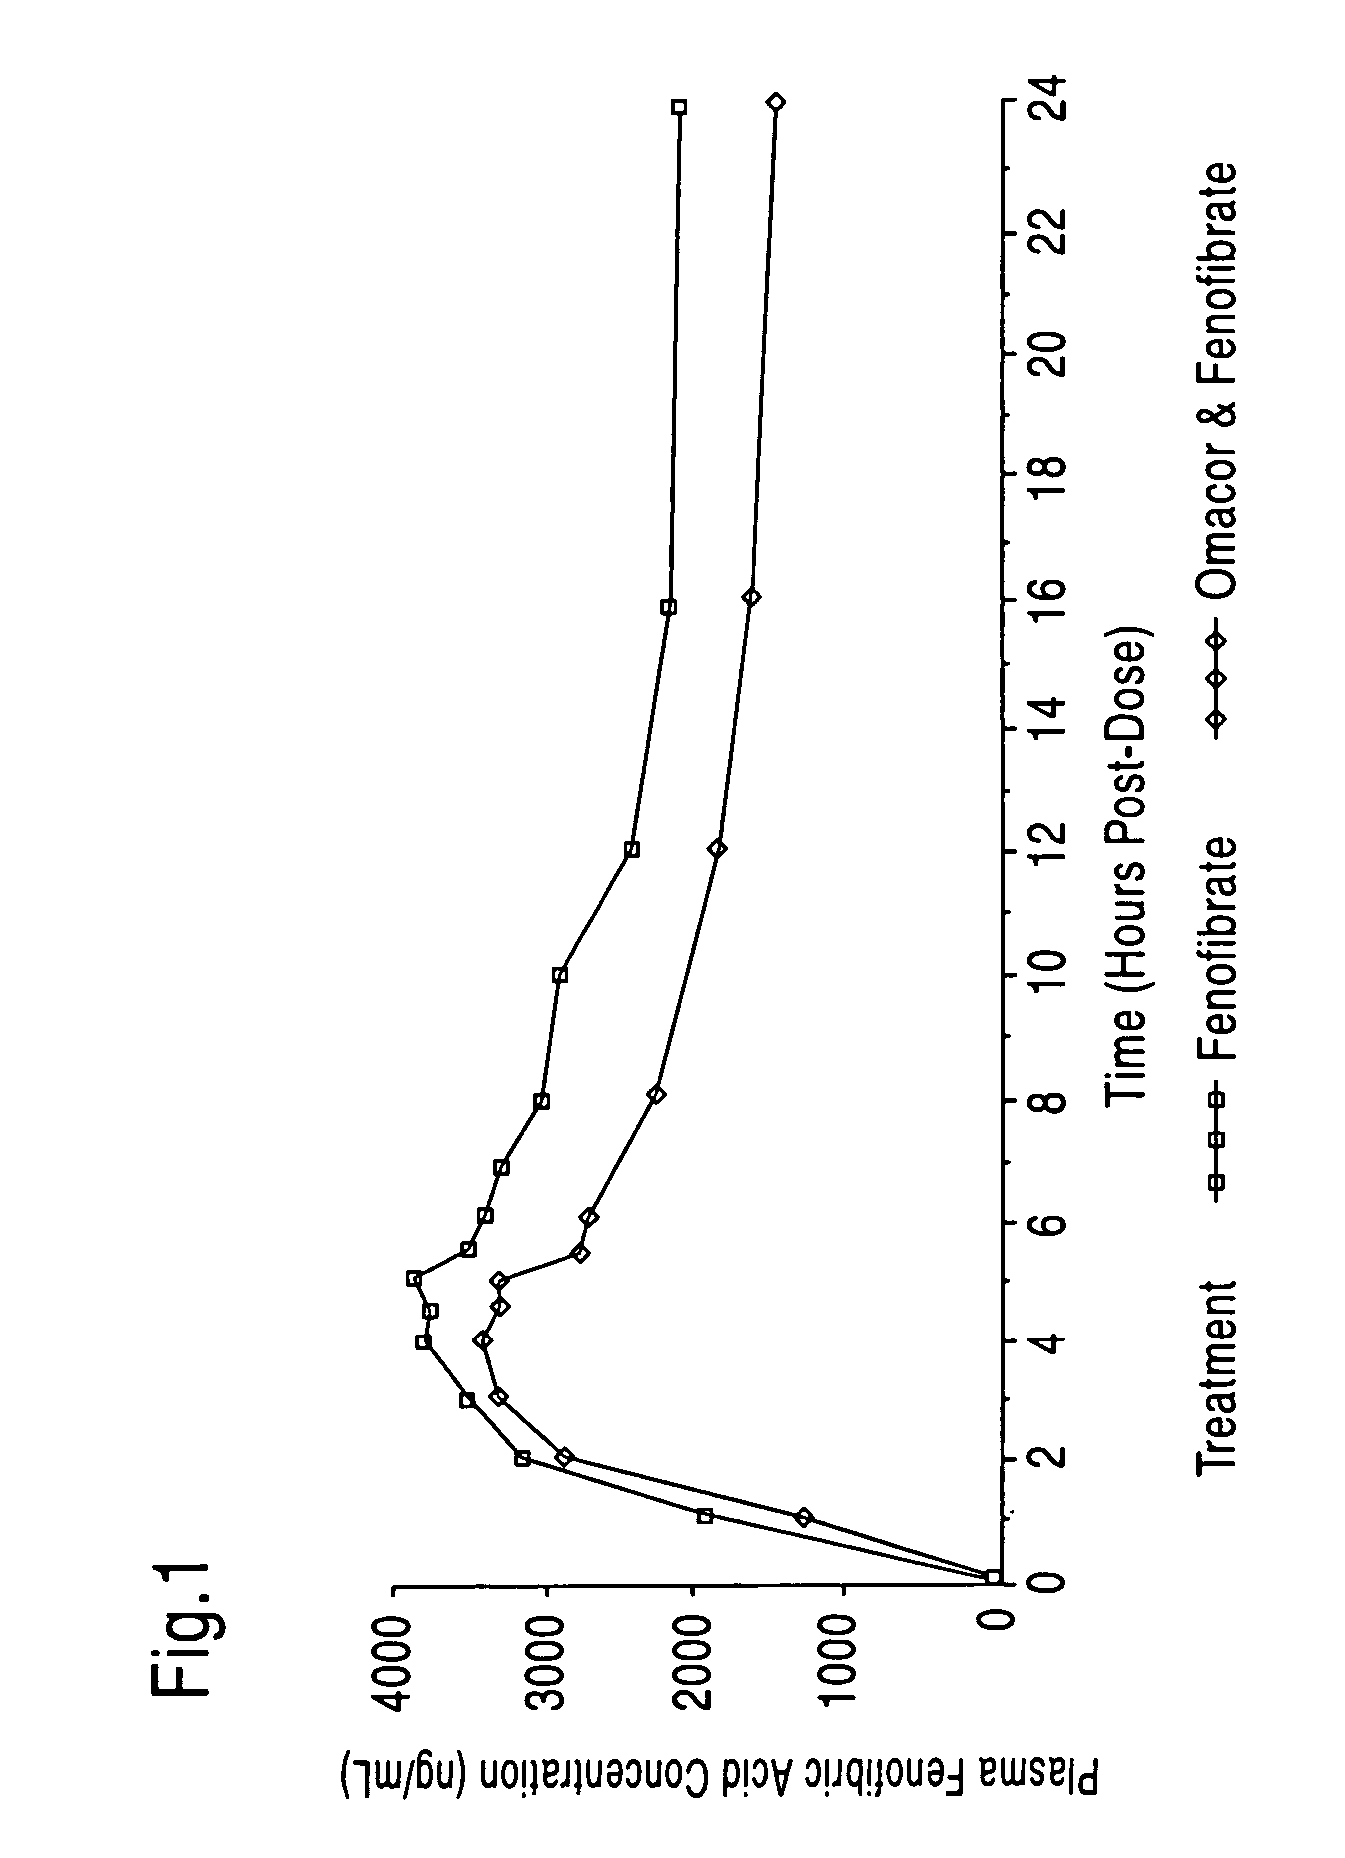 Treatment with omega-3 fatty acids and PPAR agonist and/or antagonist and a combination product thereof